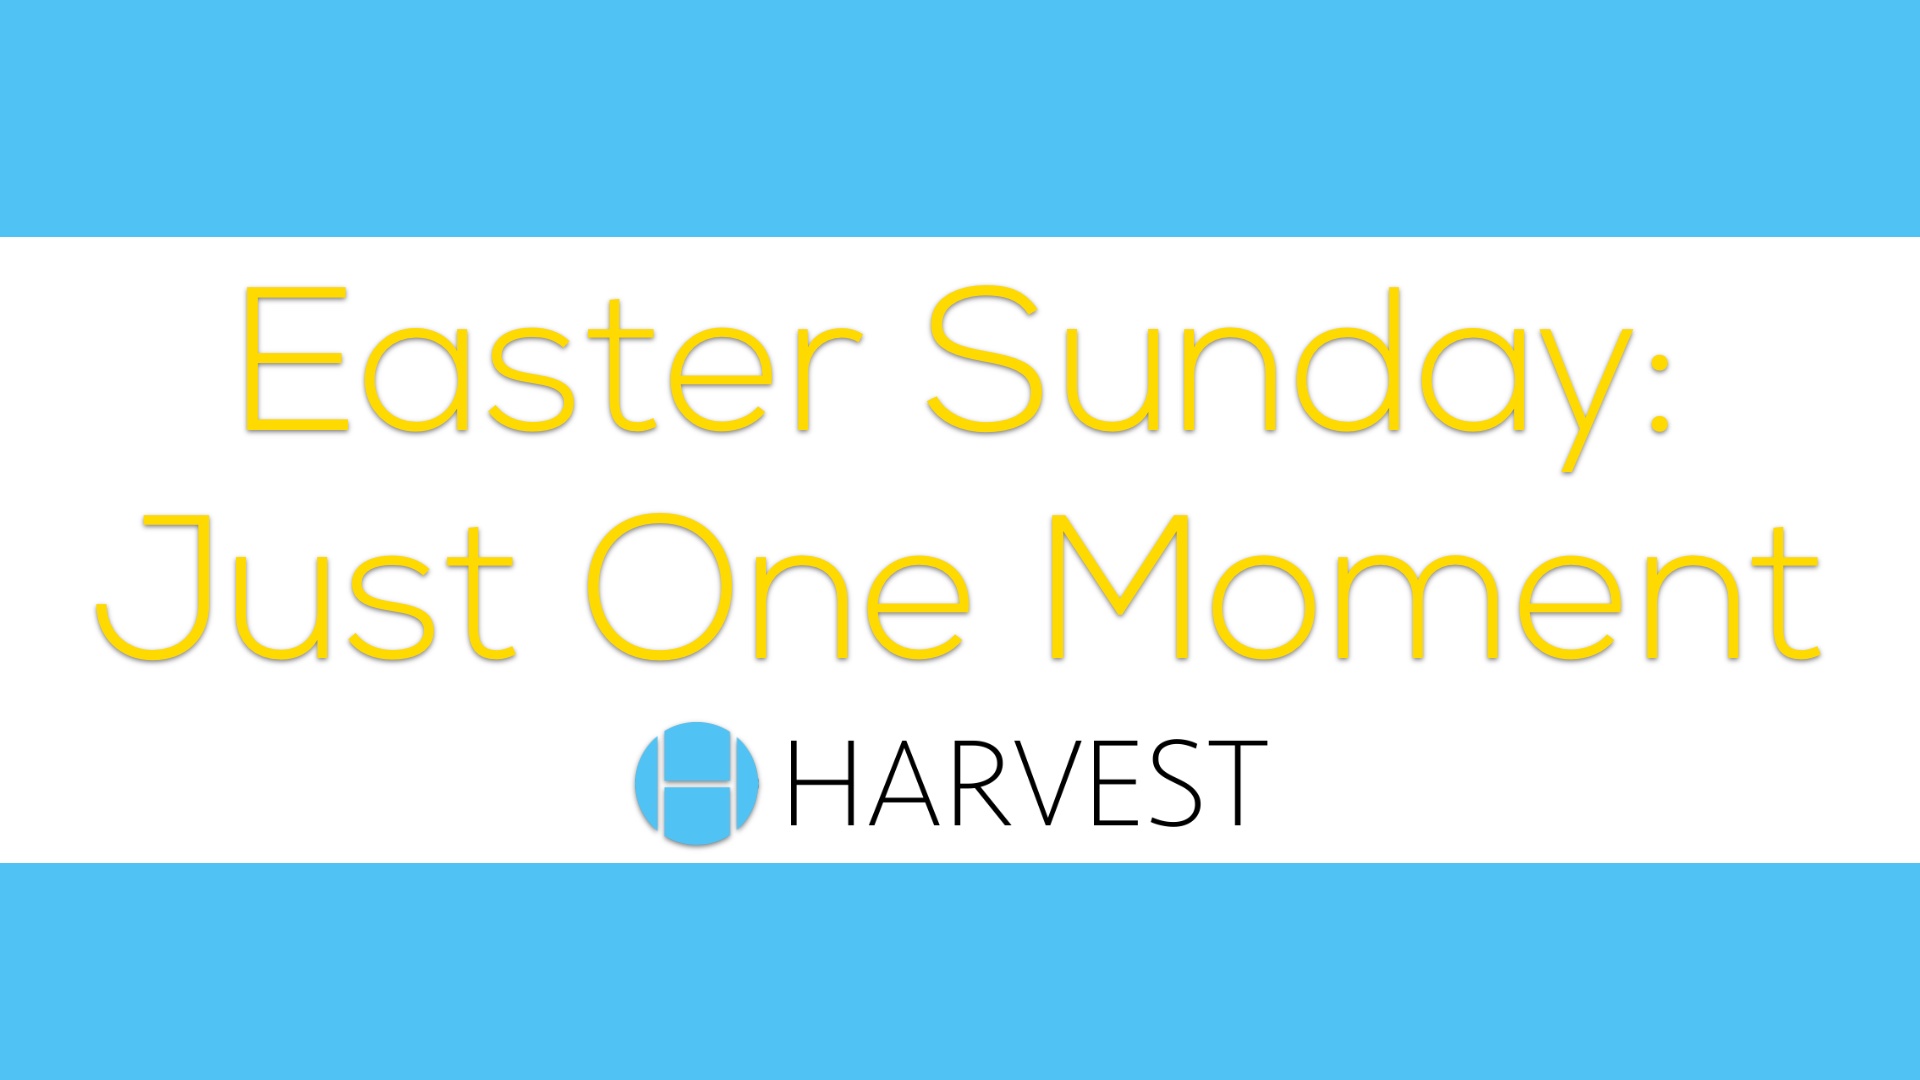 Easter Sunday: Just One Moment